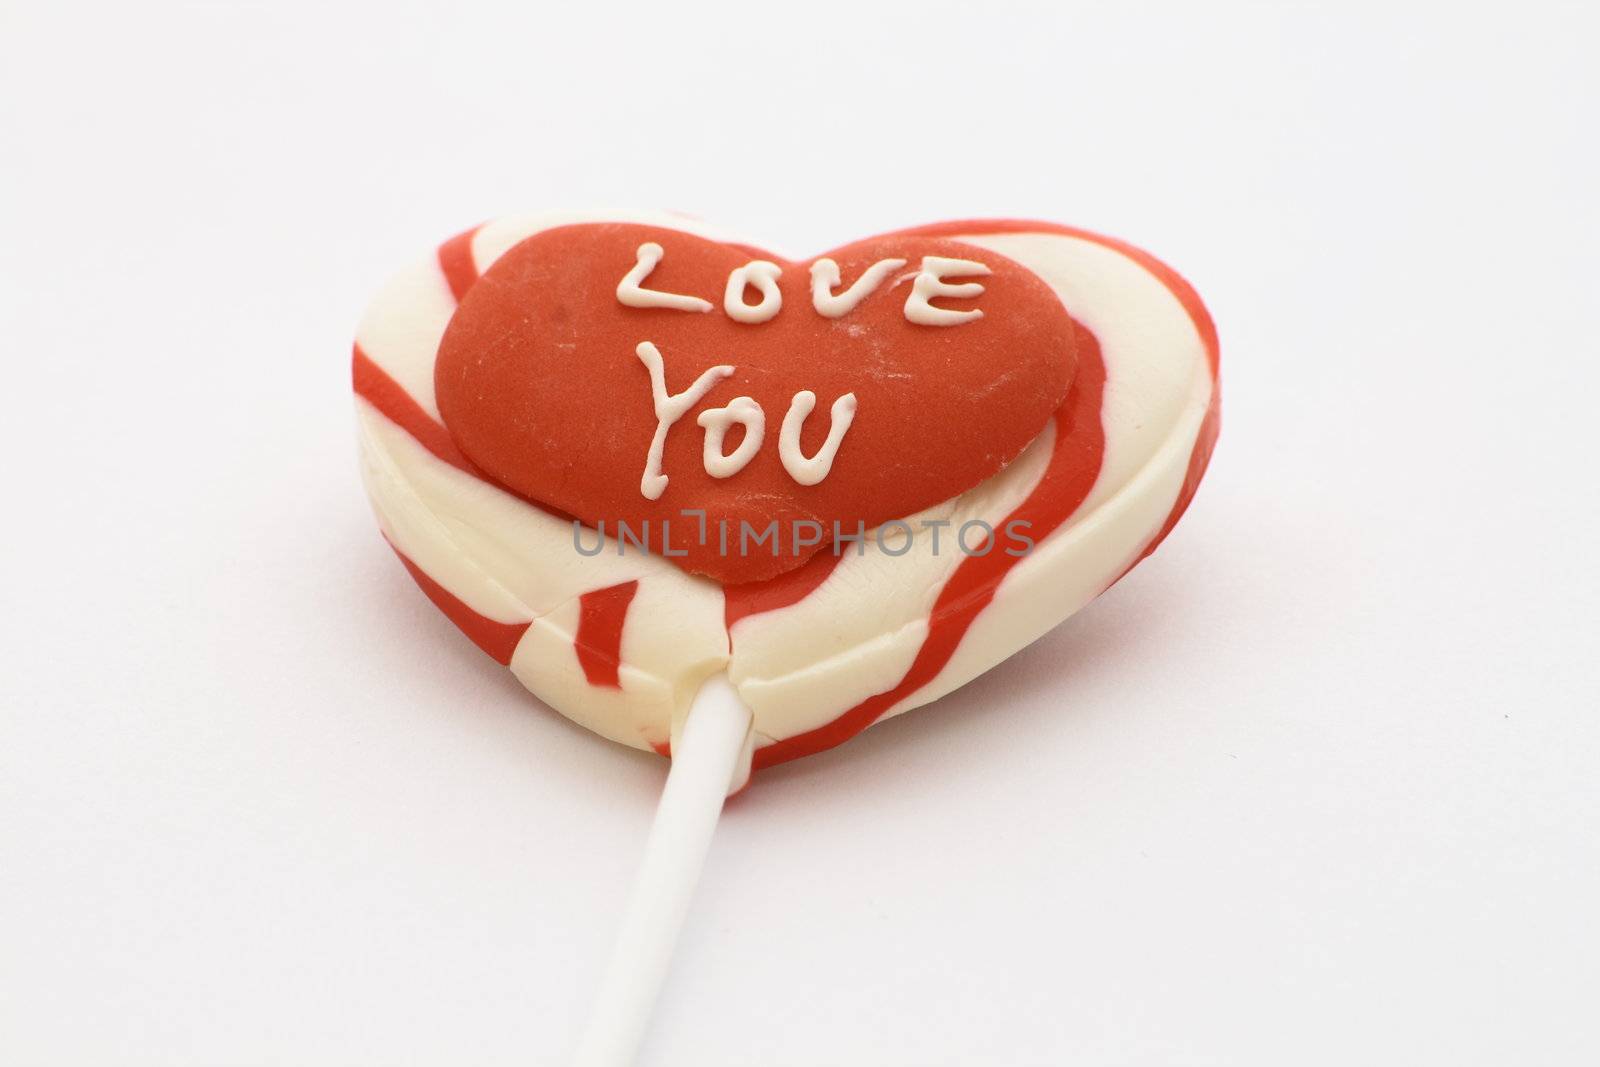 candy lolly with love you written on a red heart